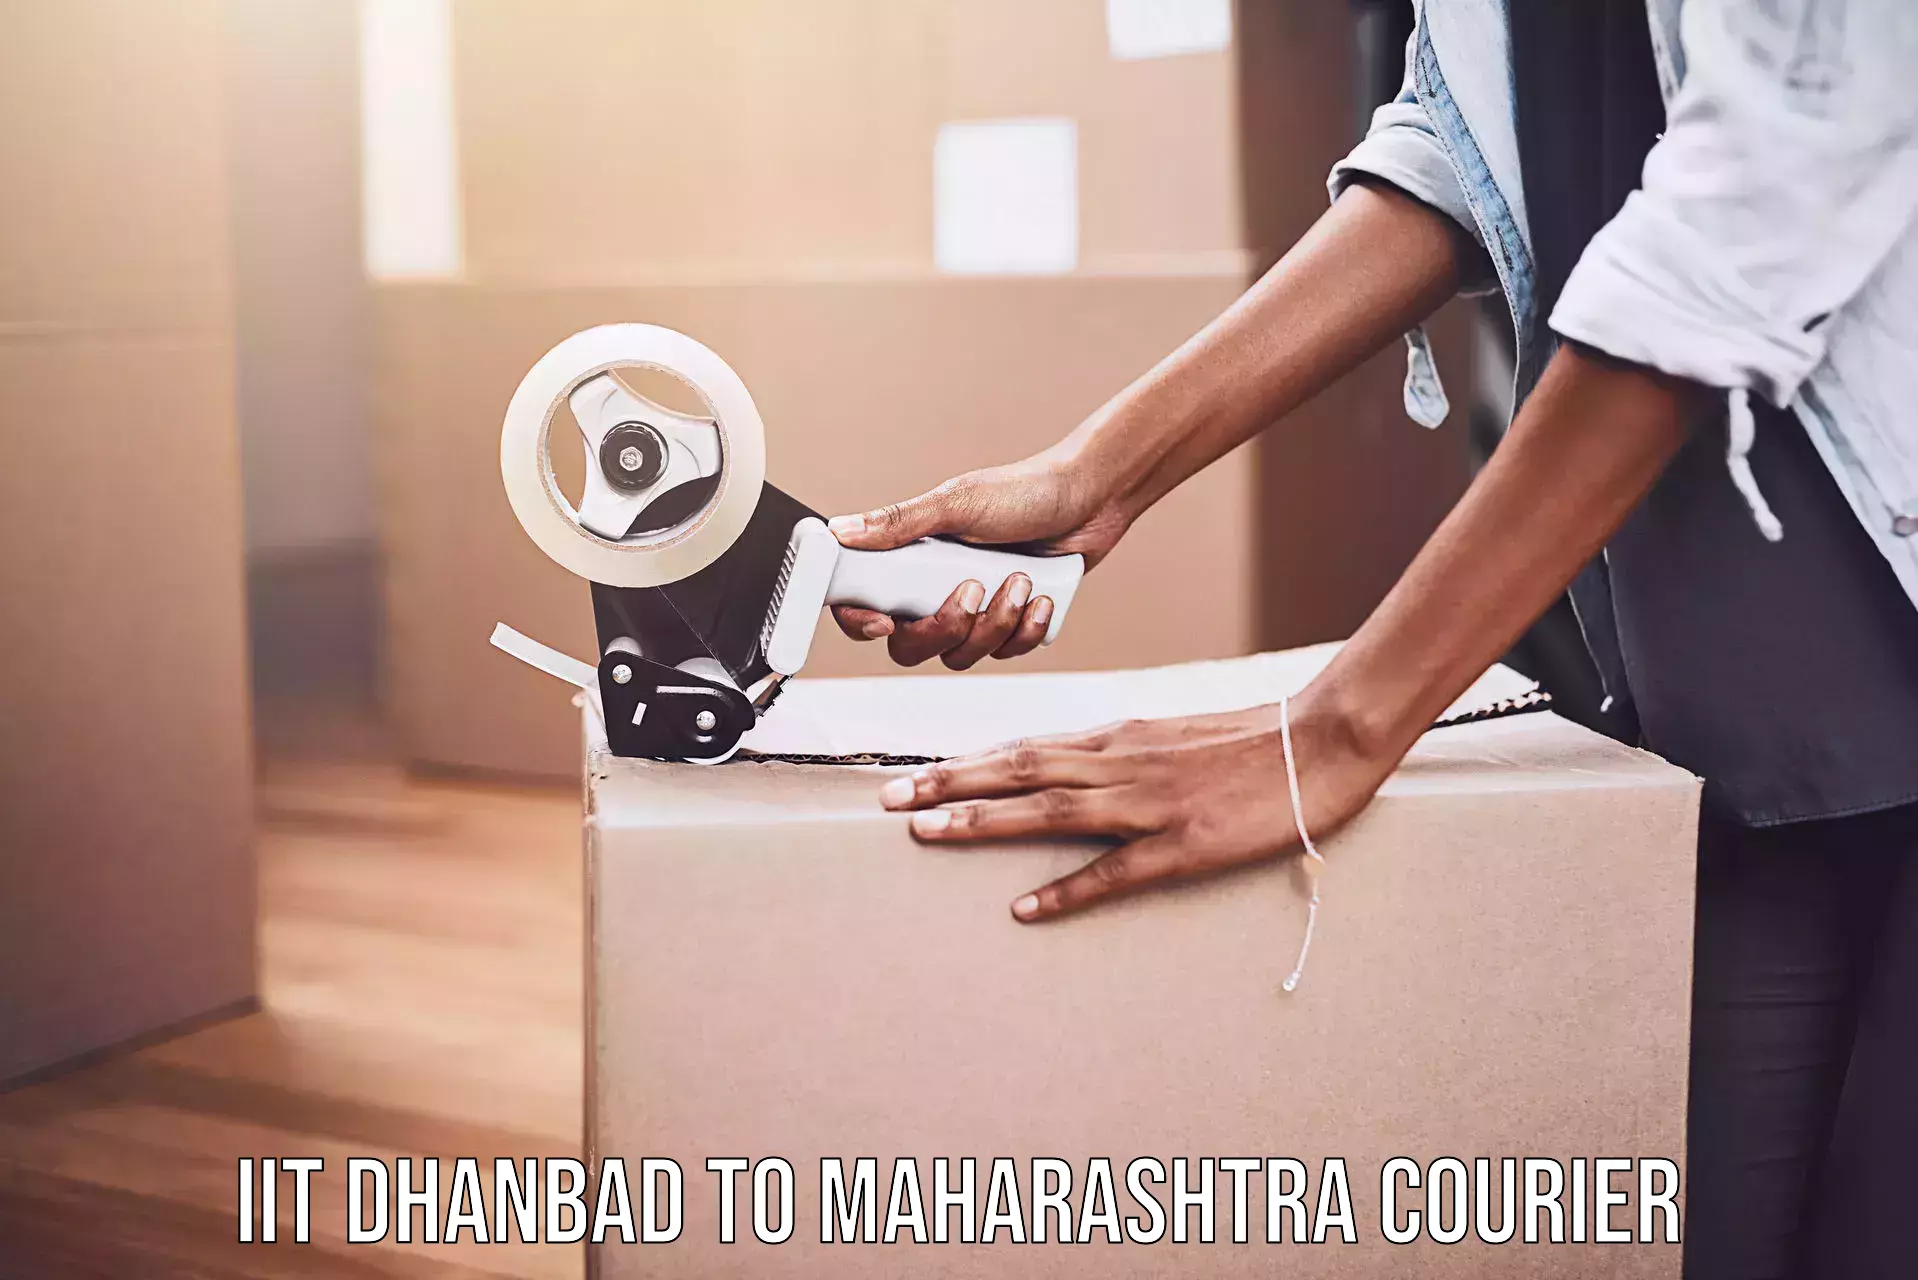 24-hour courier service IIT Dhanbad to DY Patil Vidyapeeth Mumbai